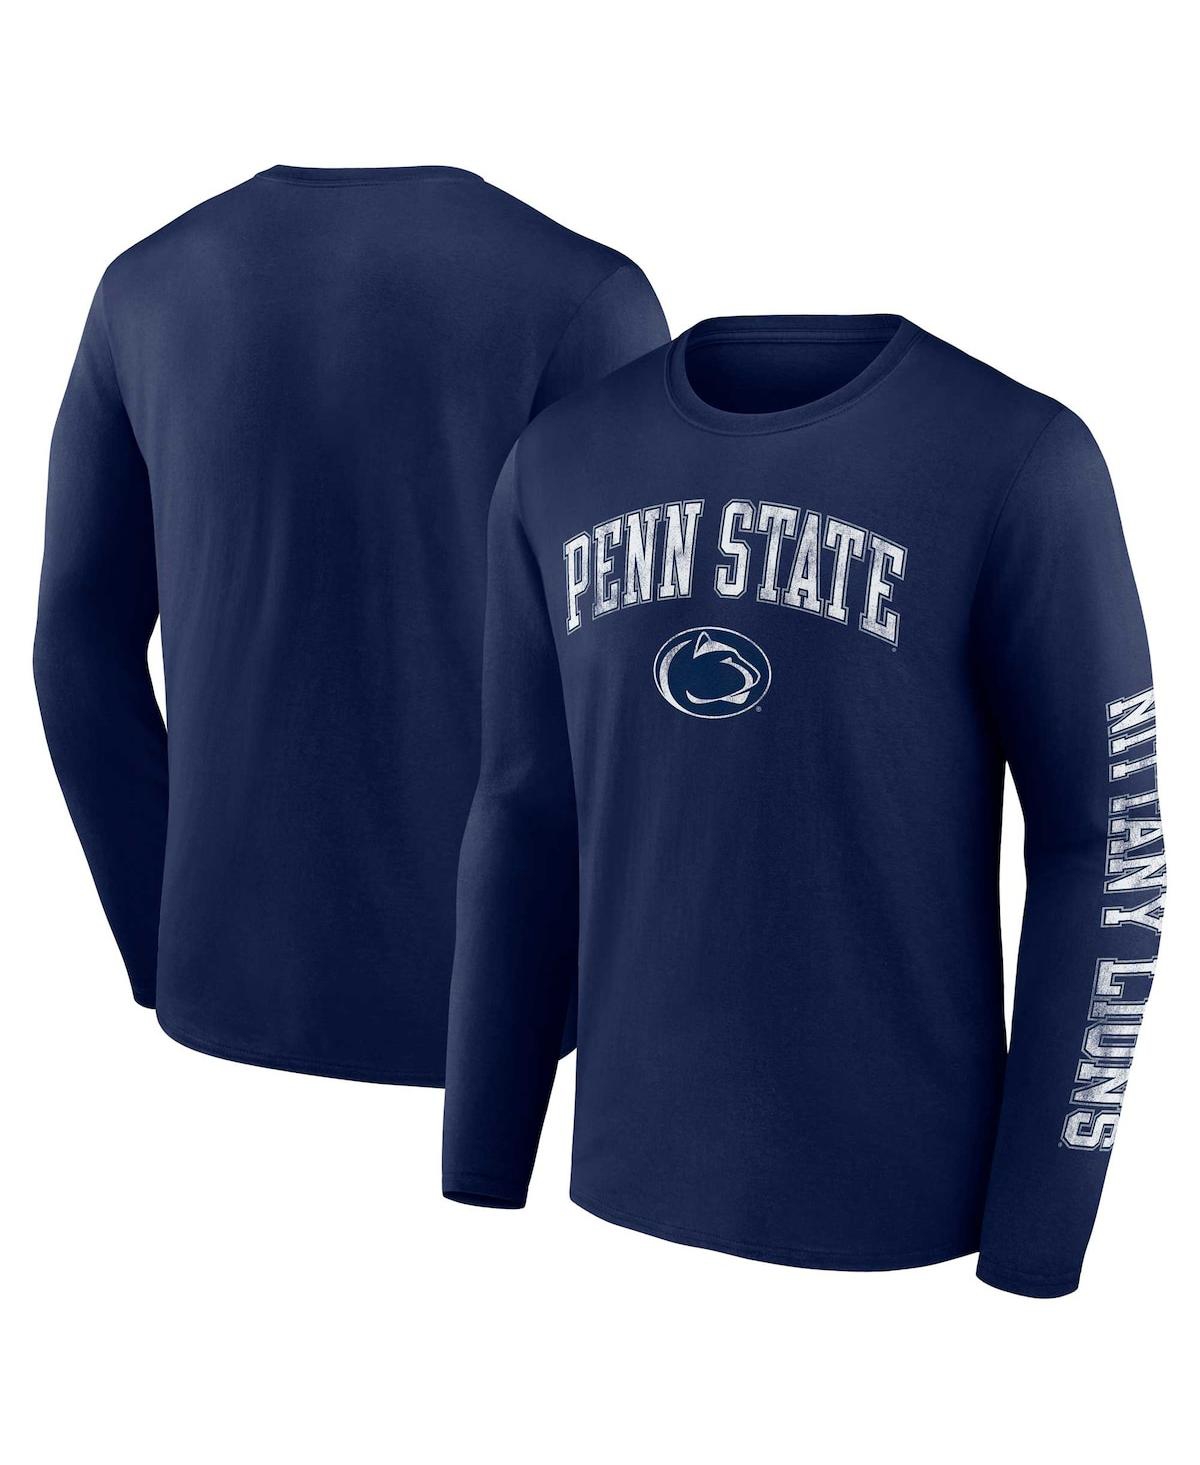 Fanatics Men's  Navy Penn State Nittany Lions Distressed Arch Over Logo Long Sleeve T-shirt